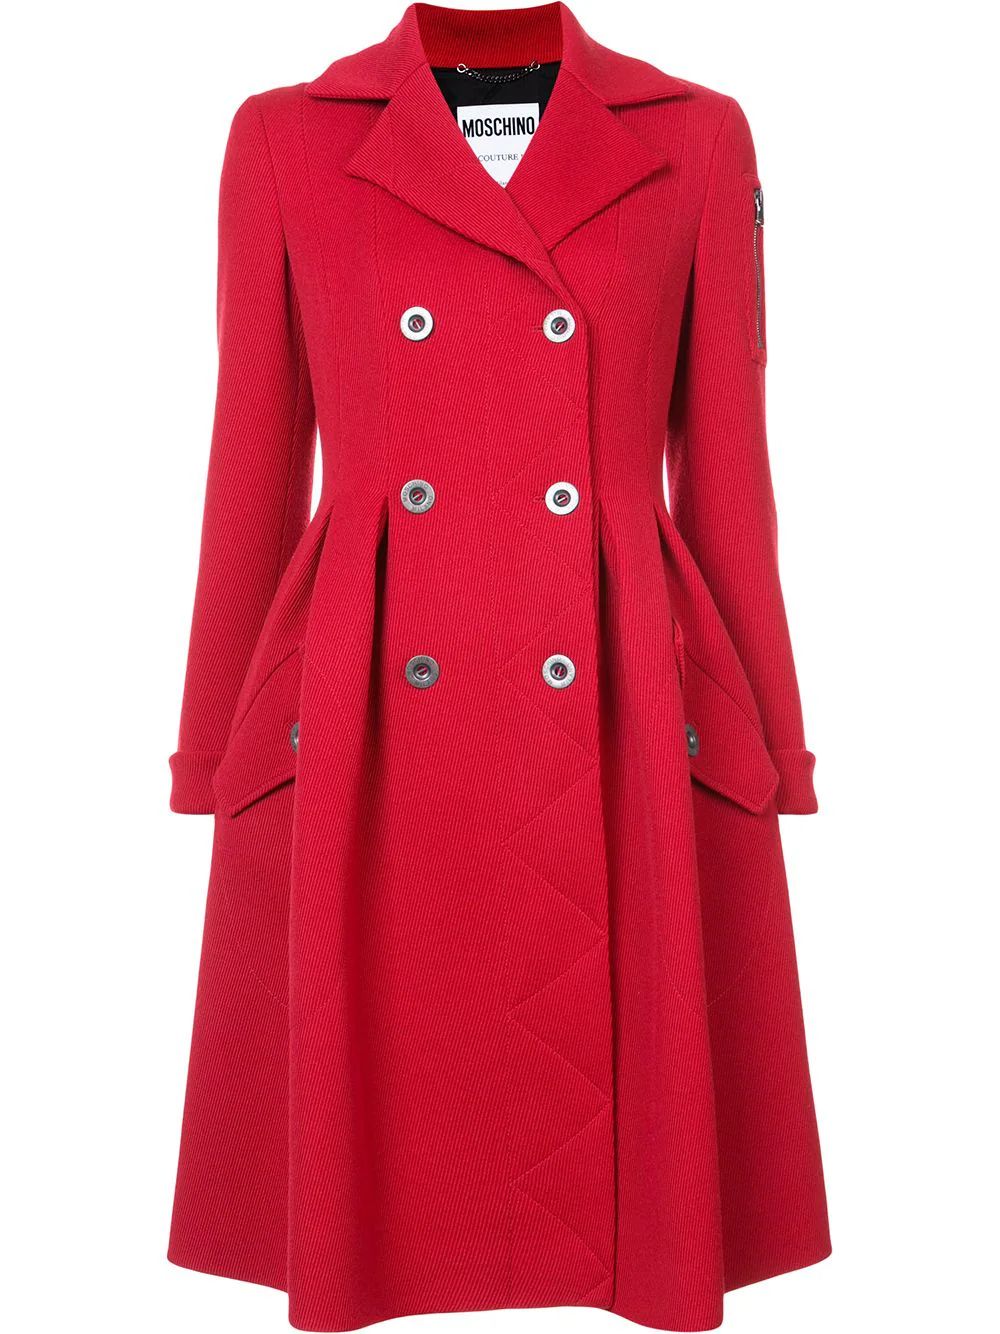 Moschino double breasted frock coat - Red | FarFetch US